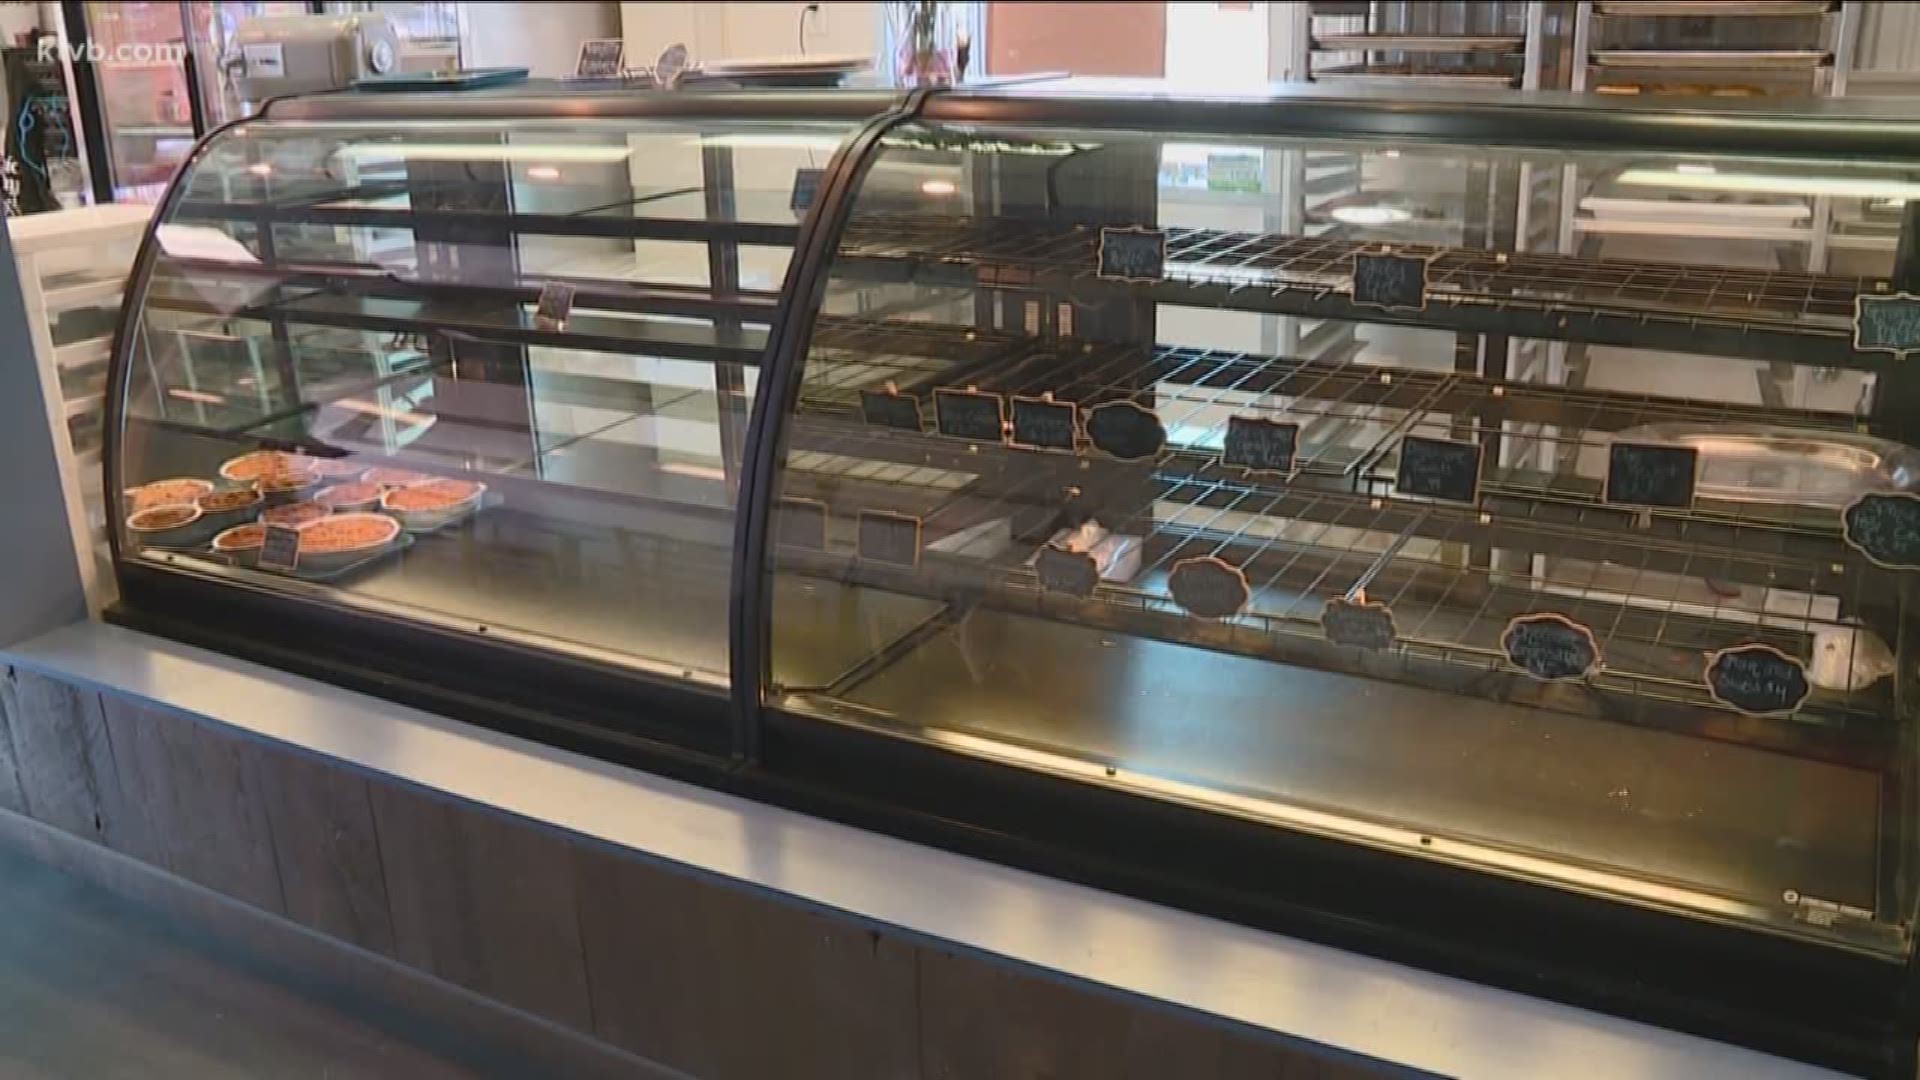 The Boise bakery sold out all of its baked good Wednesday.